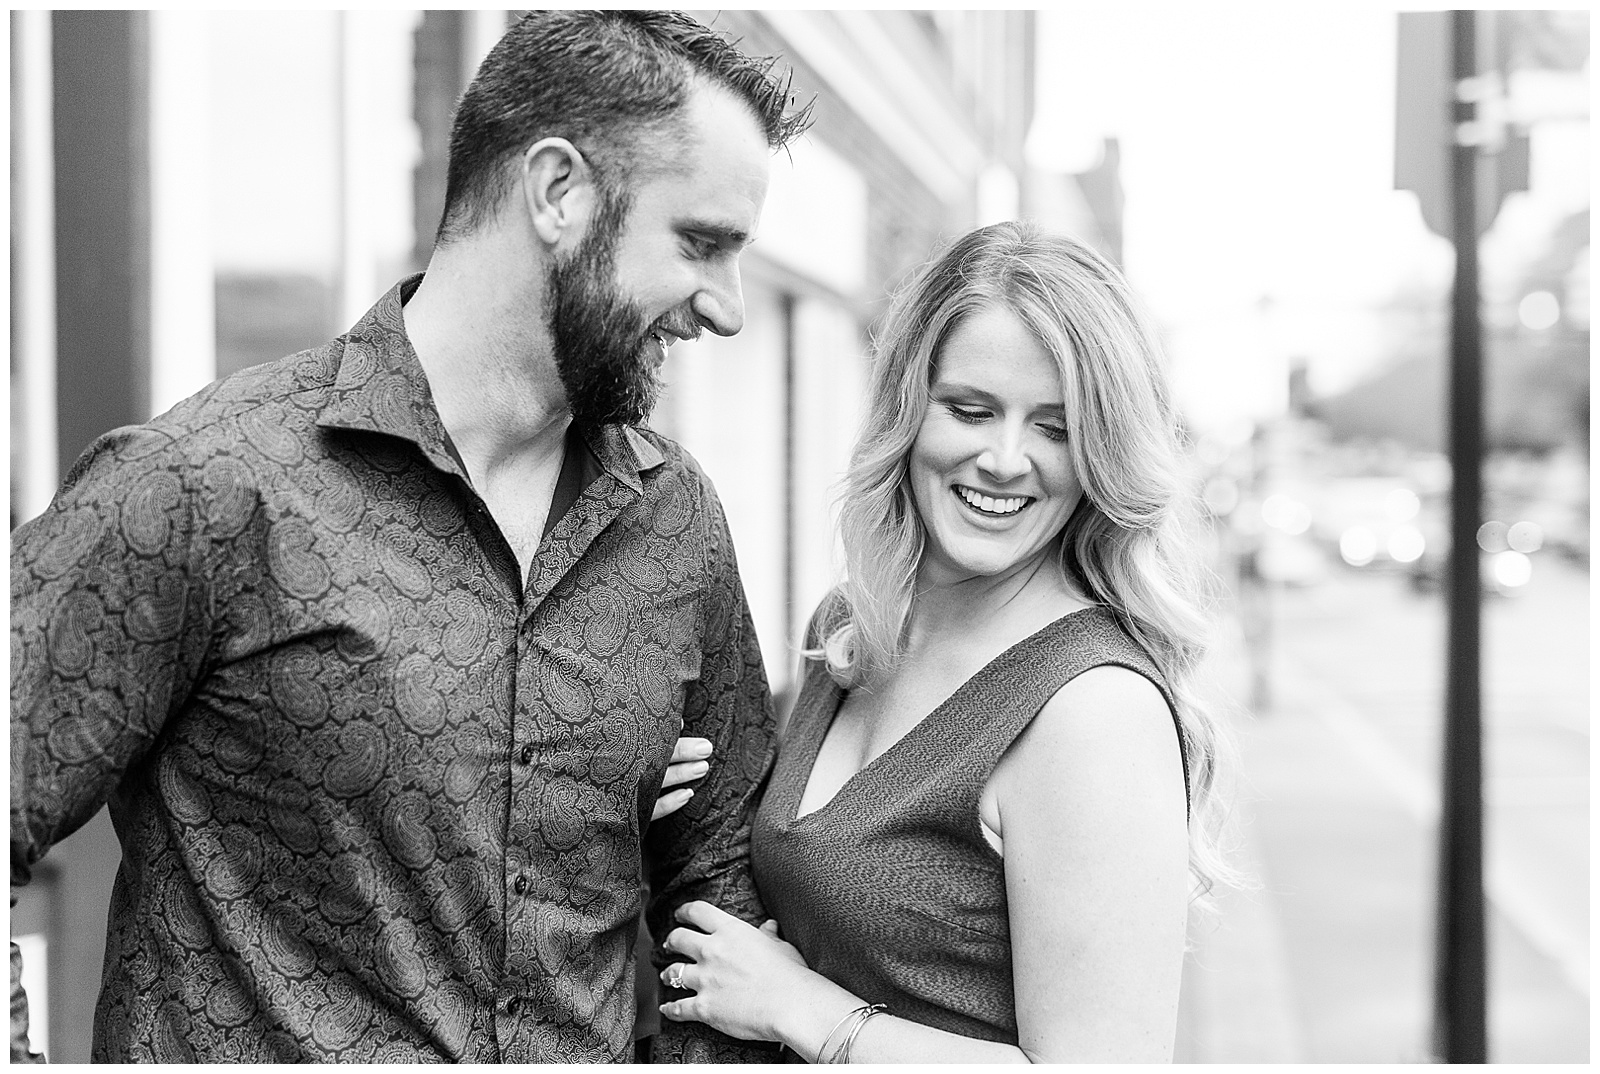 Adorable couple in downtown Waxhaw, NC Engagement Session with Green Dress Outfit Ideas